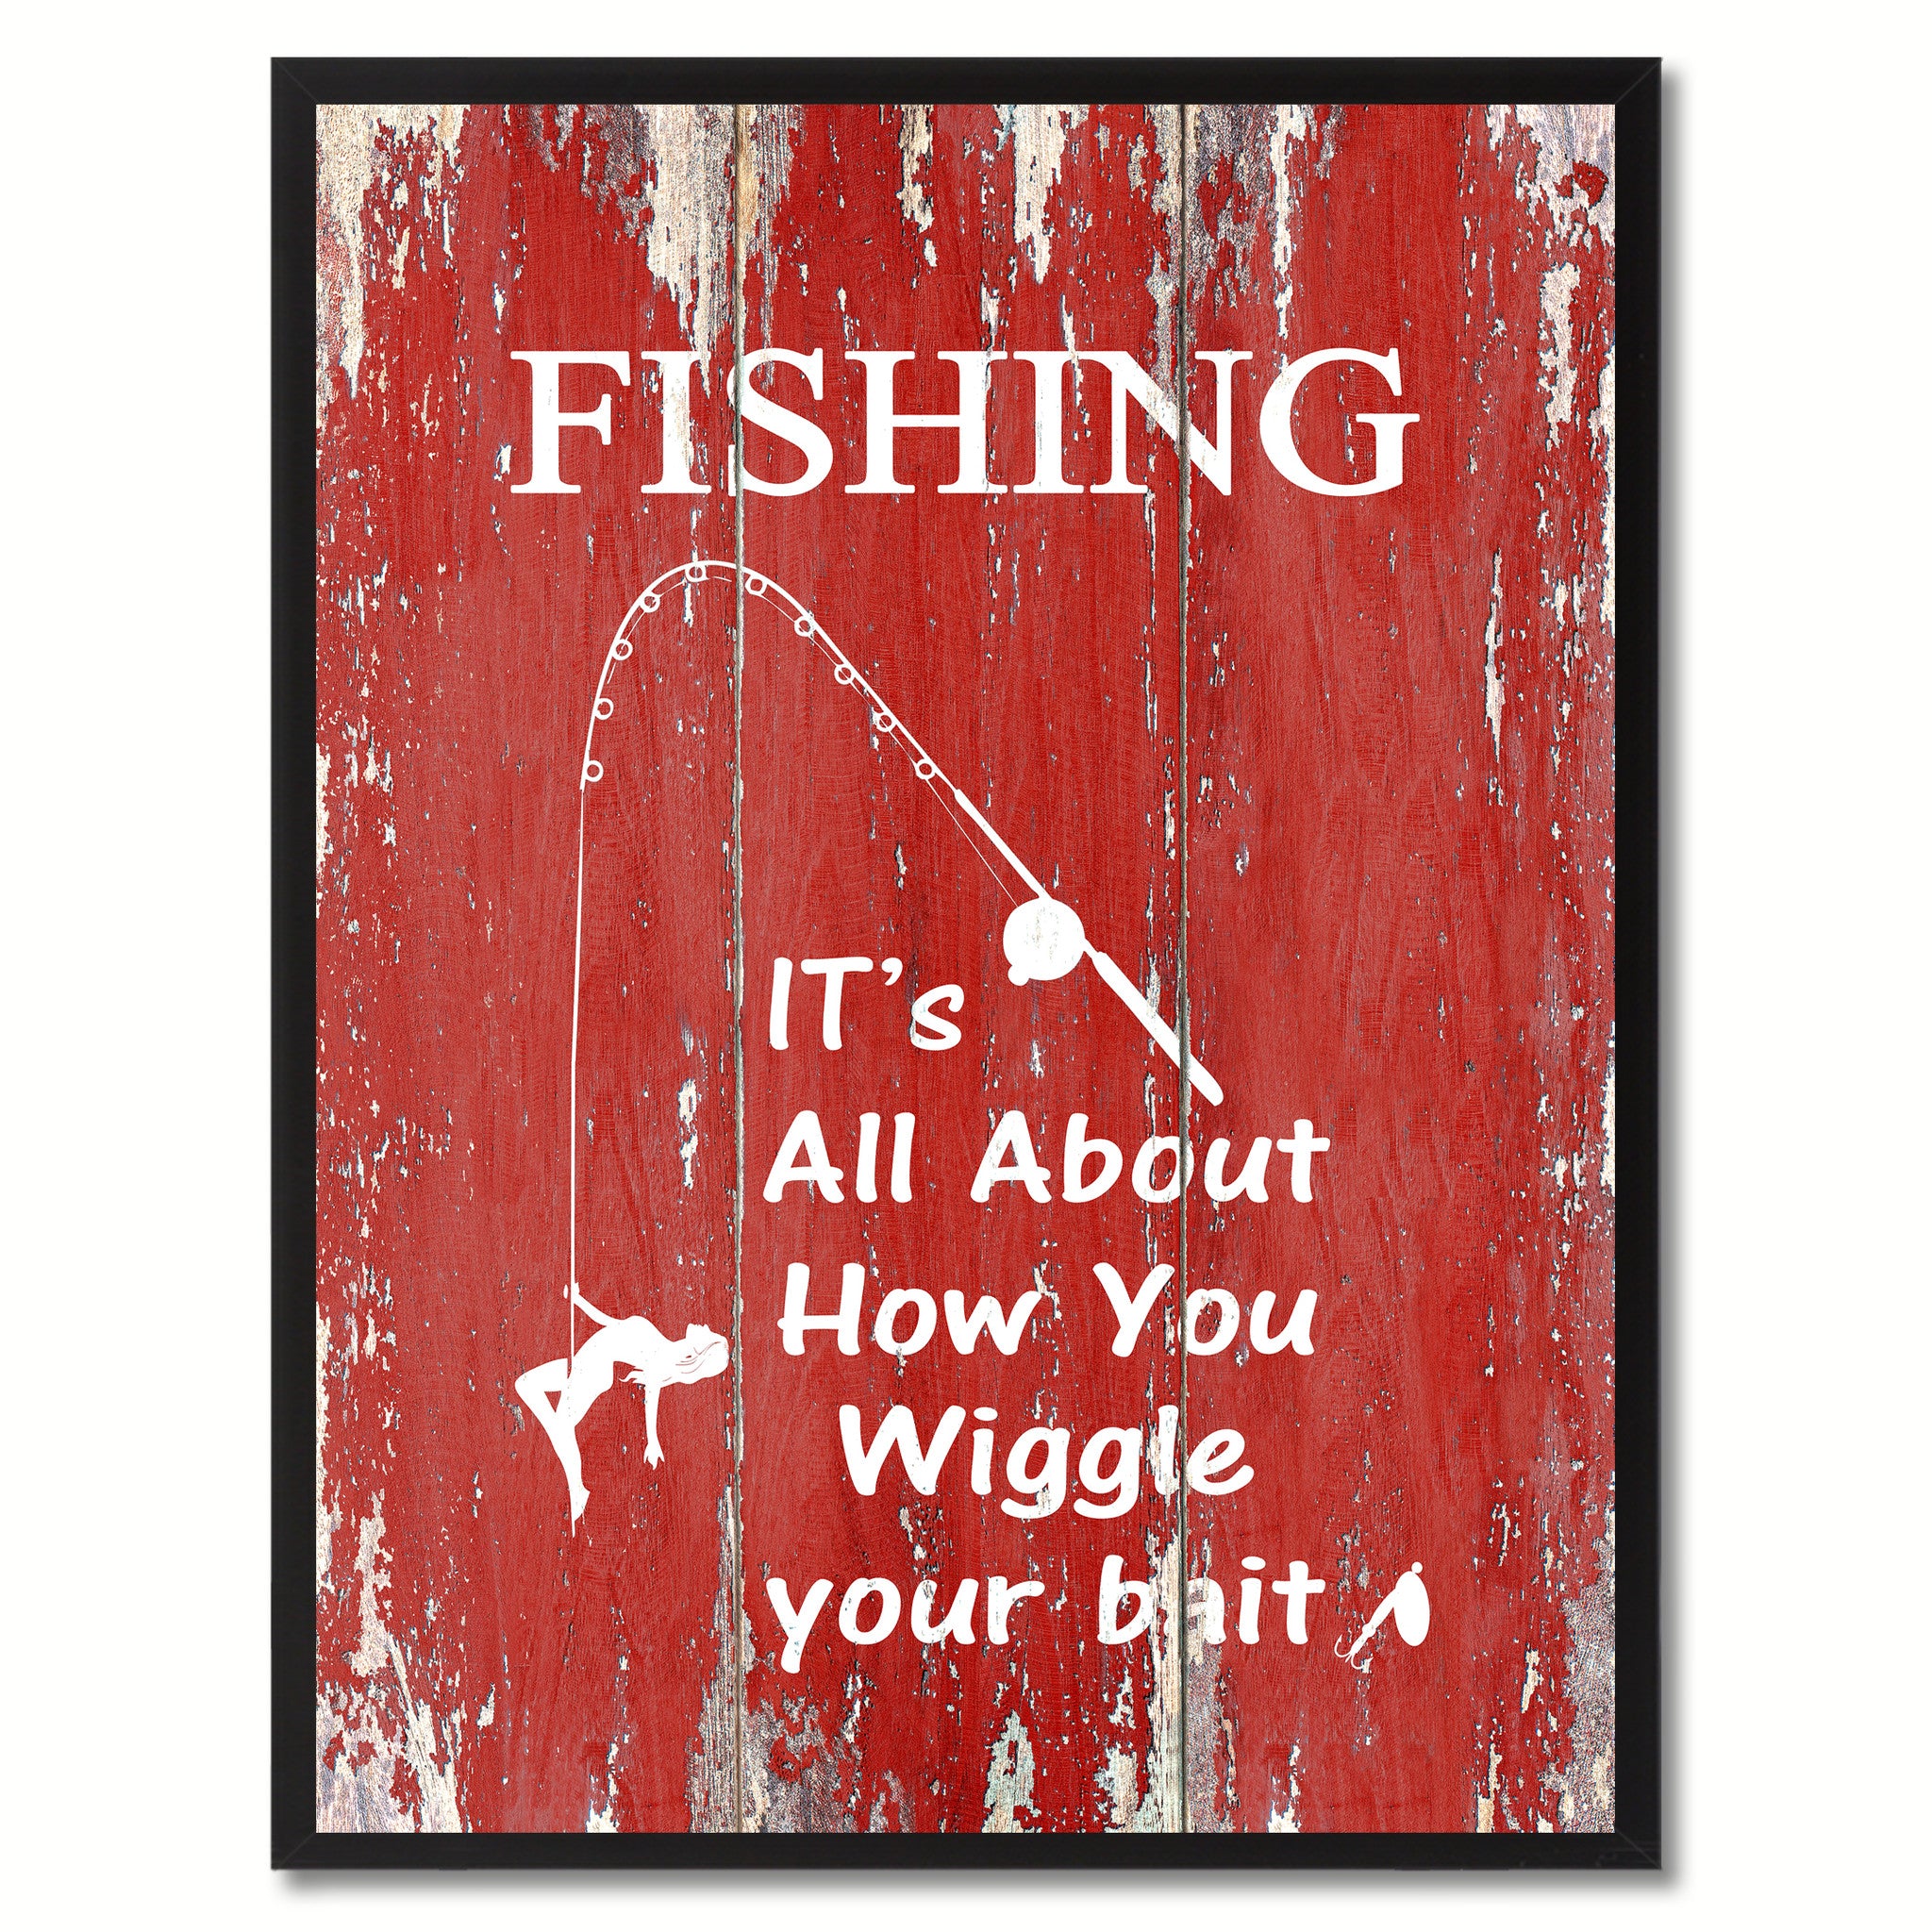 Fishing It's All About How You Wiggle Your Bait Saying Canvas Print, Black Picture Frame Home Decor Wall Art Gifts